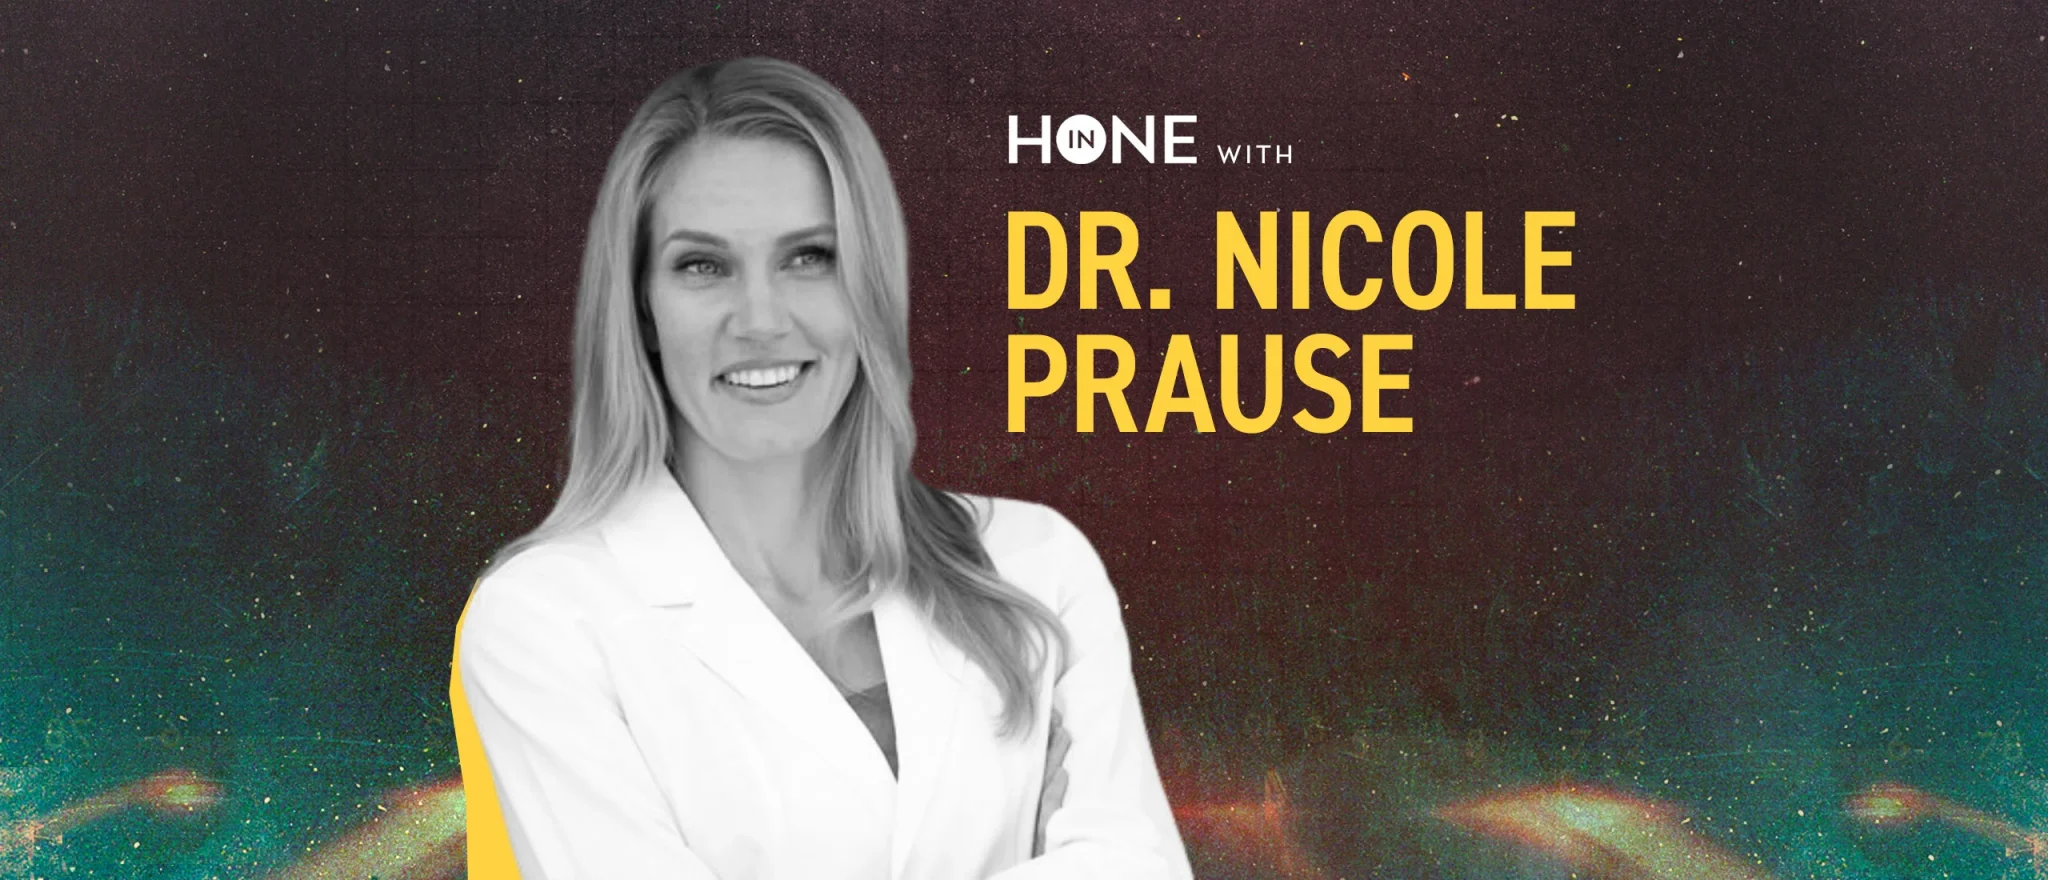 Dr. Nicole Prause: The Secret to Deeper Intimacy With Your Partner